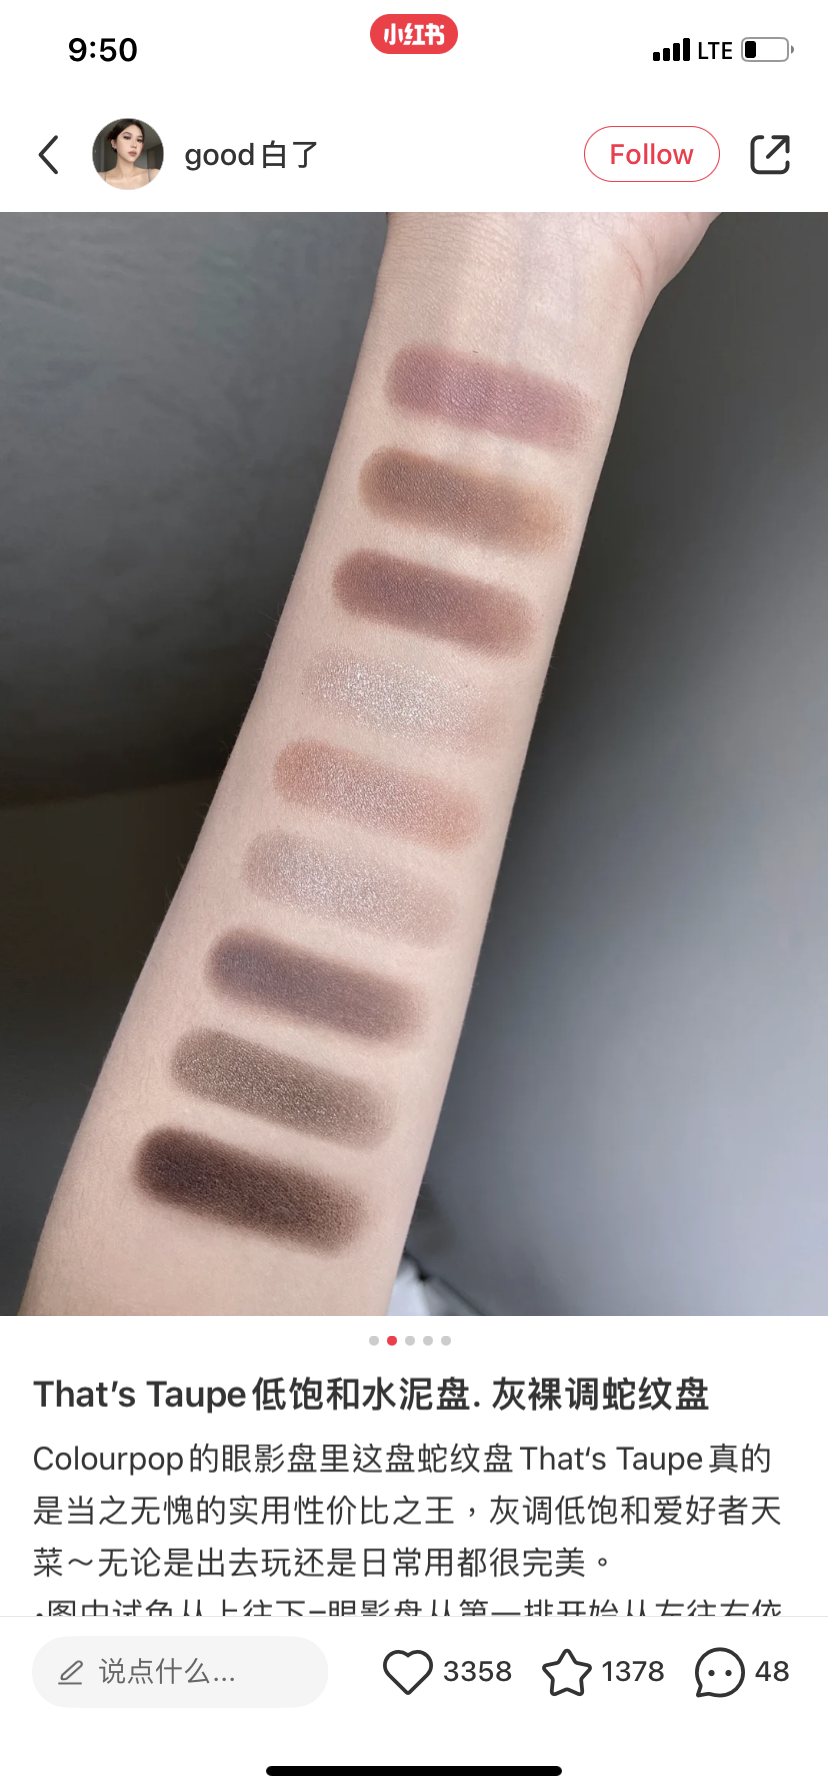 Colourpop that's taupe eyeshadow palette